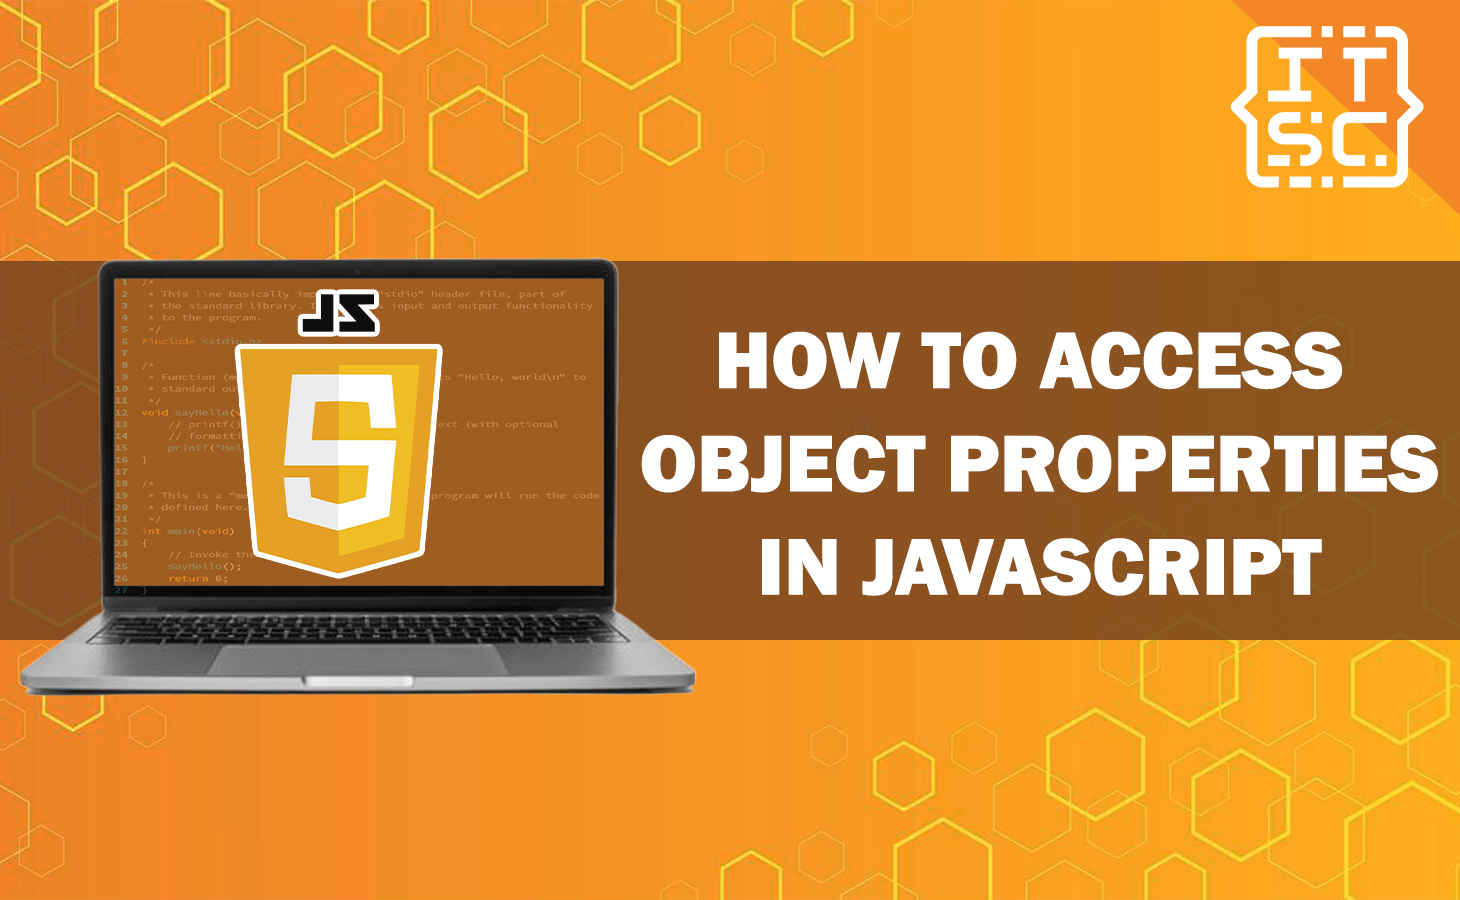 How to access object properties in JavaScript